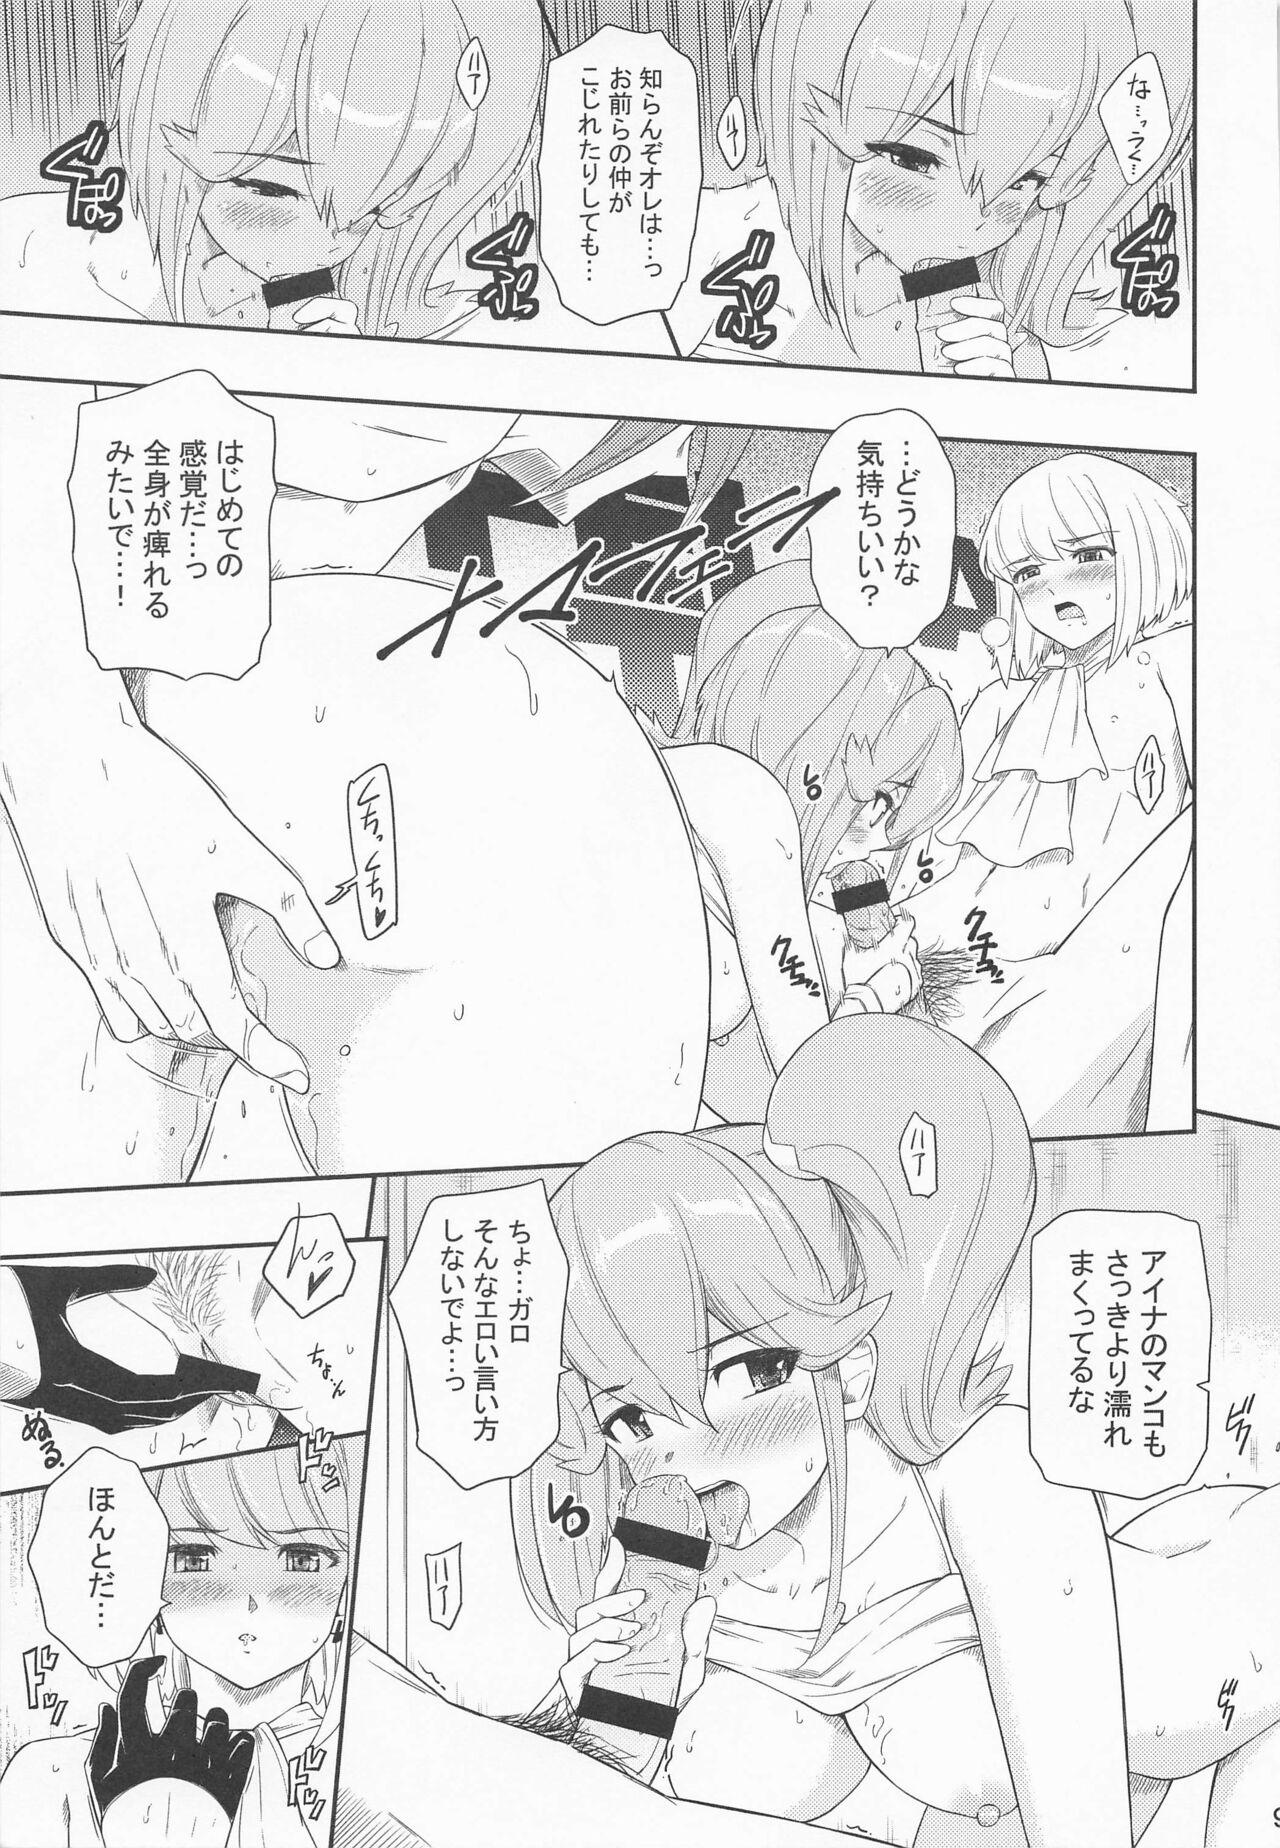 Ass Fucked EROMARE - Suddenly 3P sex is happening... - Promare Officesex - Page 8